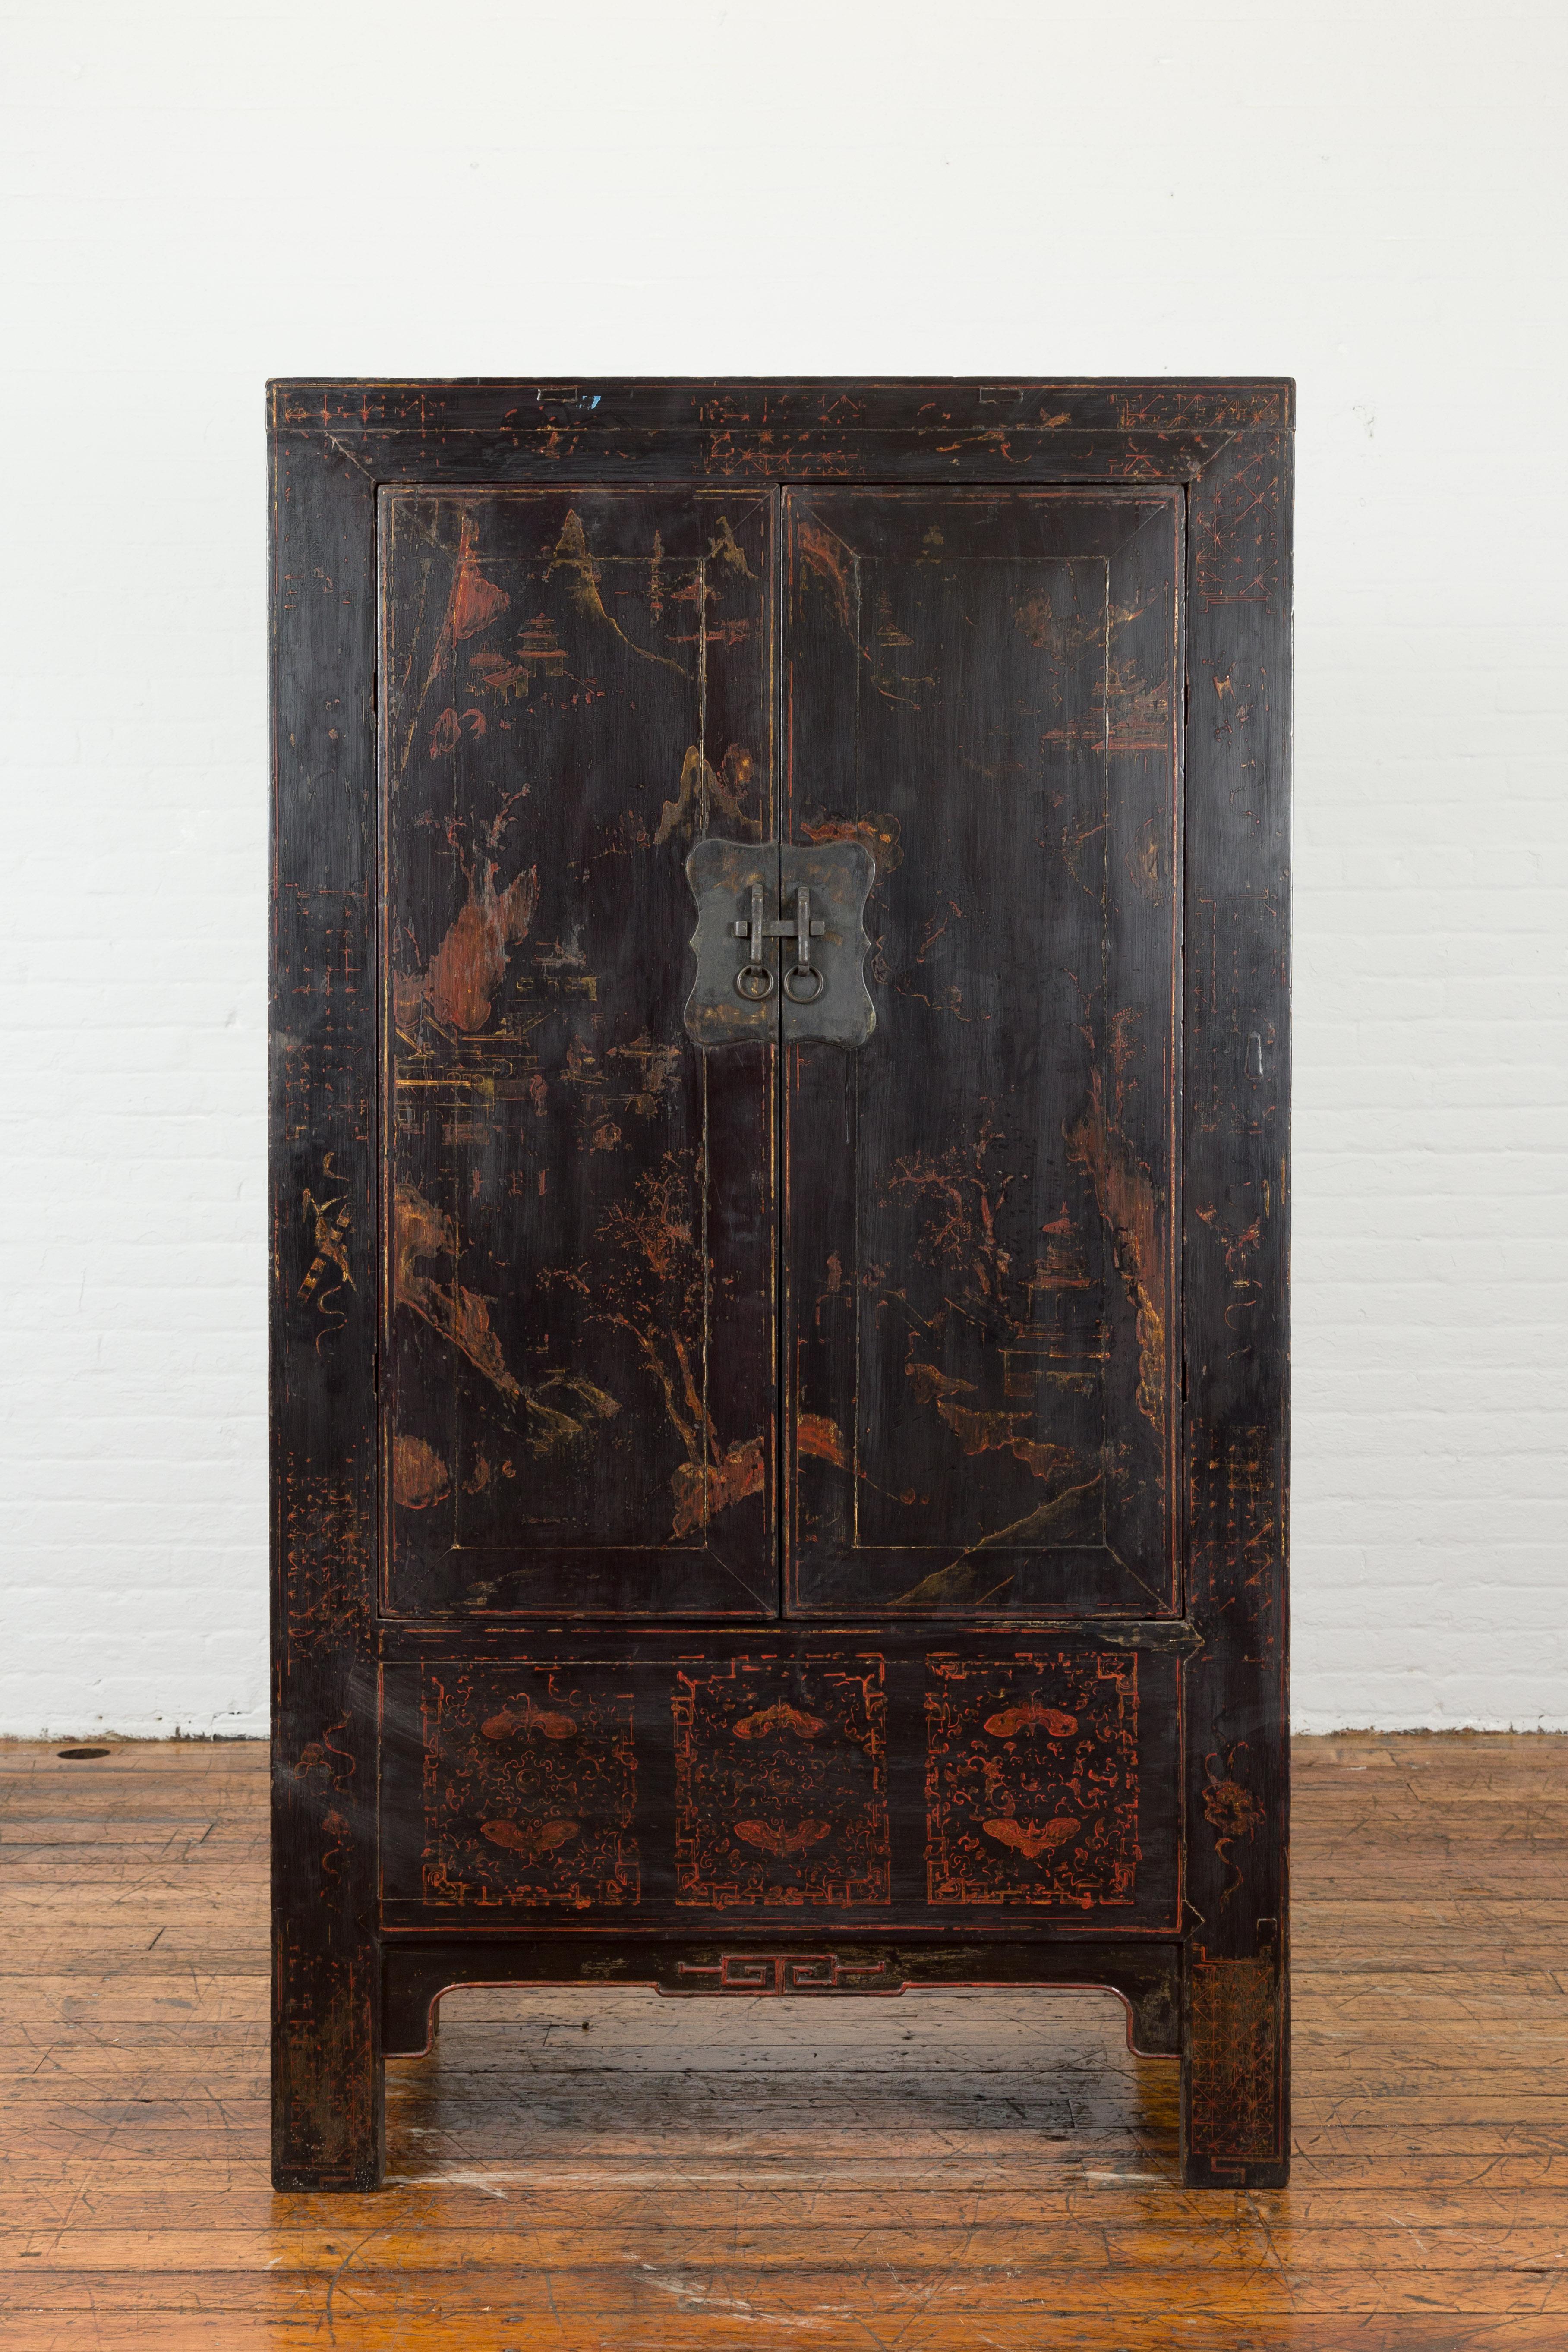 A Chinese Qing Dynasty period Shanxi cabinet from the 19th century, with original lacquer. Created in the North-Eastern province of Shanxi during the Qing dynasty, this 19th century cabinet features its original black lacquer structure, adorned with